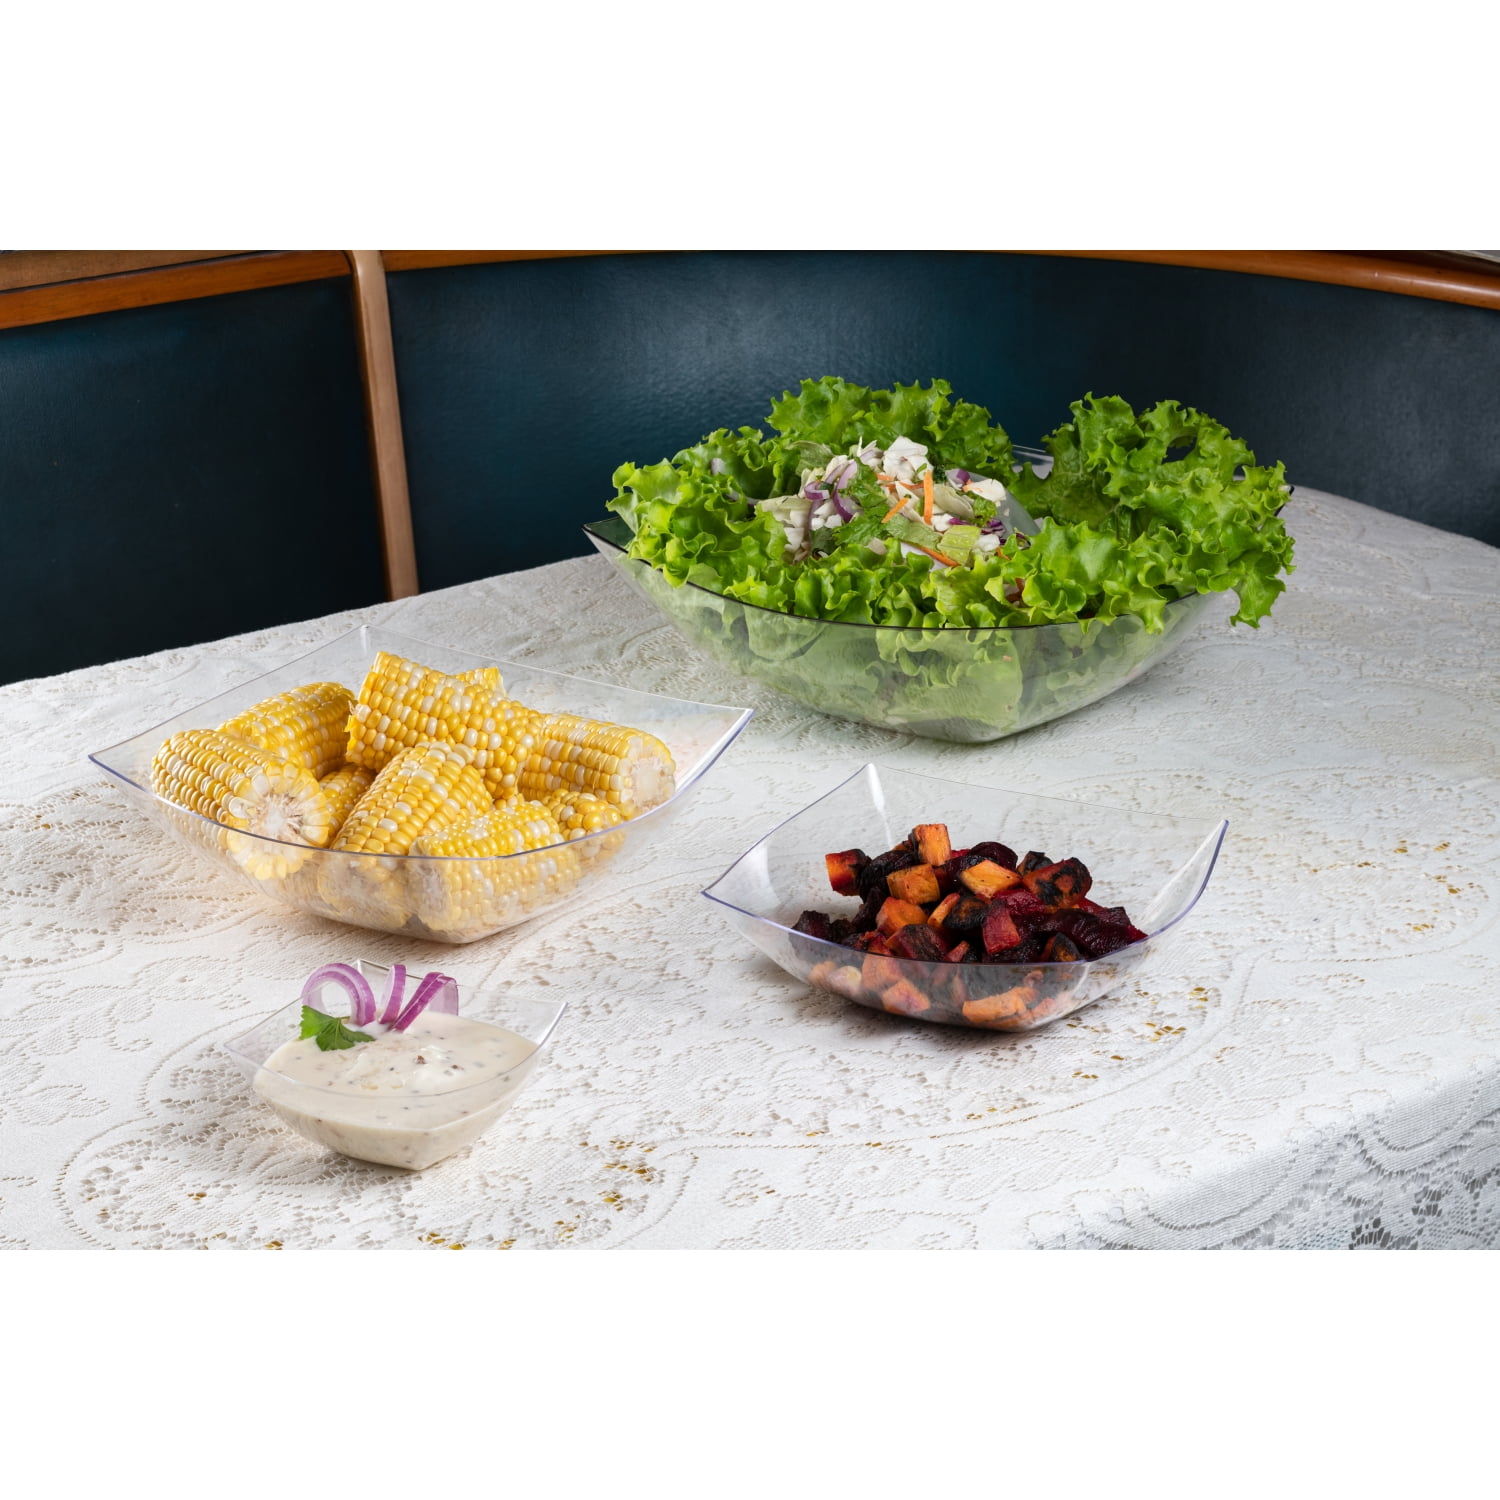 DecorRack Serving Bowl with Lid, Extra Large Bowl for Salad